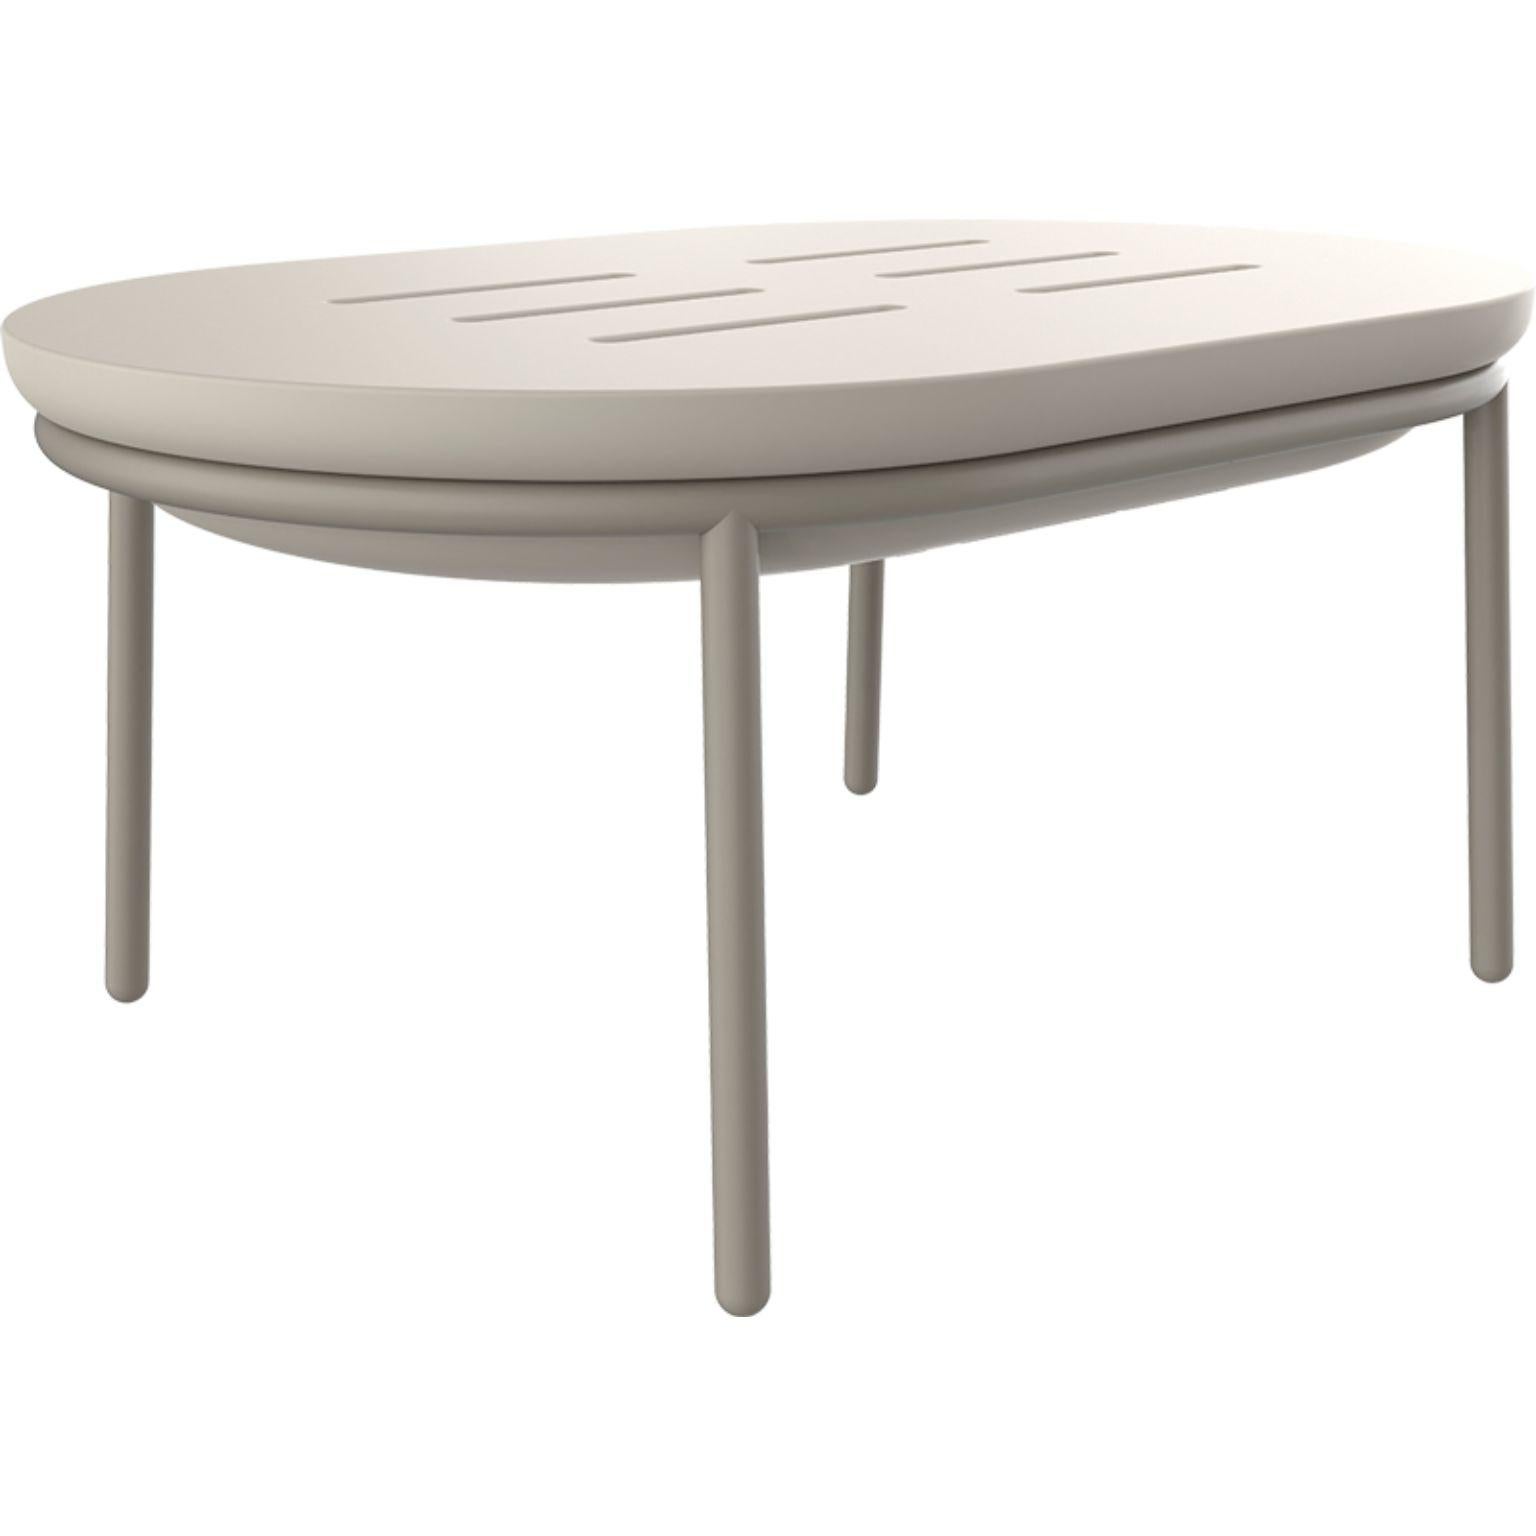 Lace cream 90 low table by MOWEE
Dimensions: D60 x W90 x H41 cm
Material: Polyethylene and stainless steel.
Weight: 9.2 kg
Also available in different colors and finishes (lacquered). 

Lace is a collection of furniture made by rotomoulding.